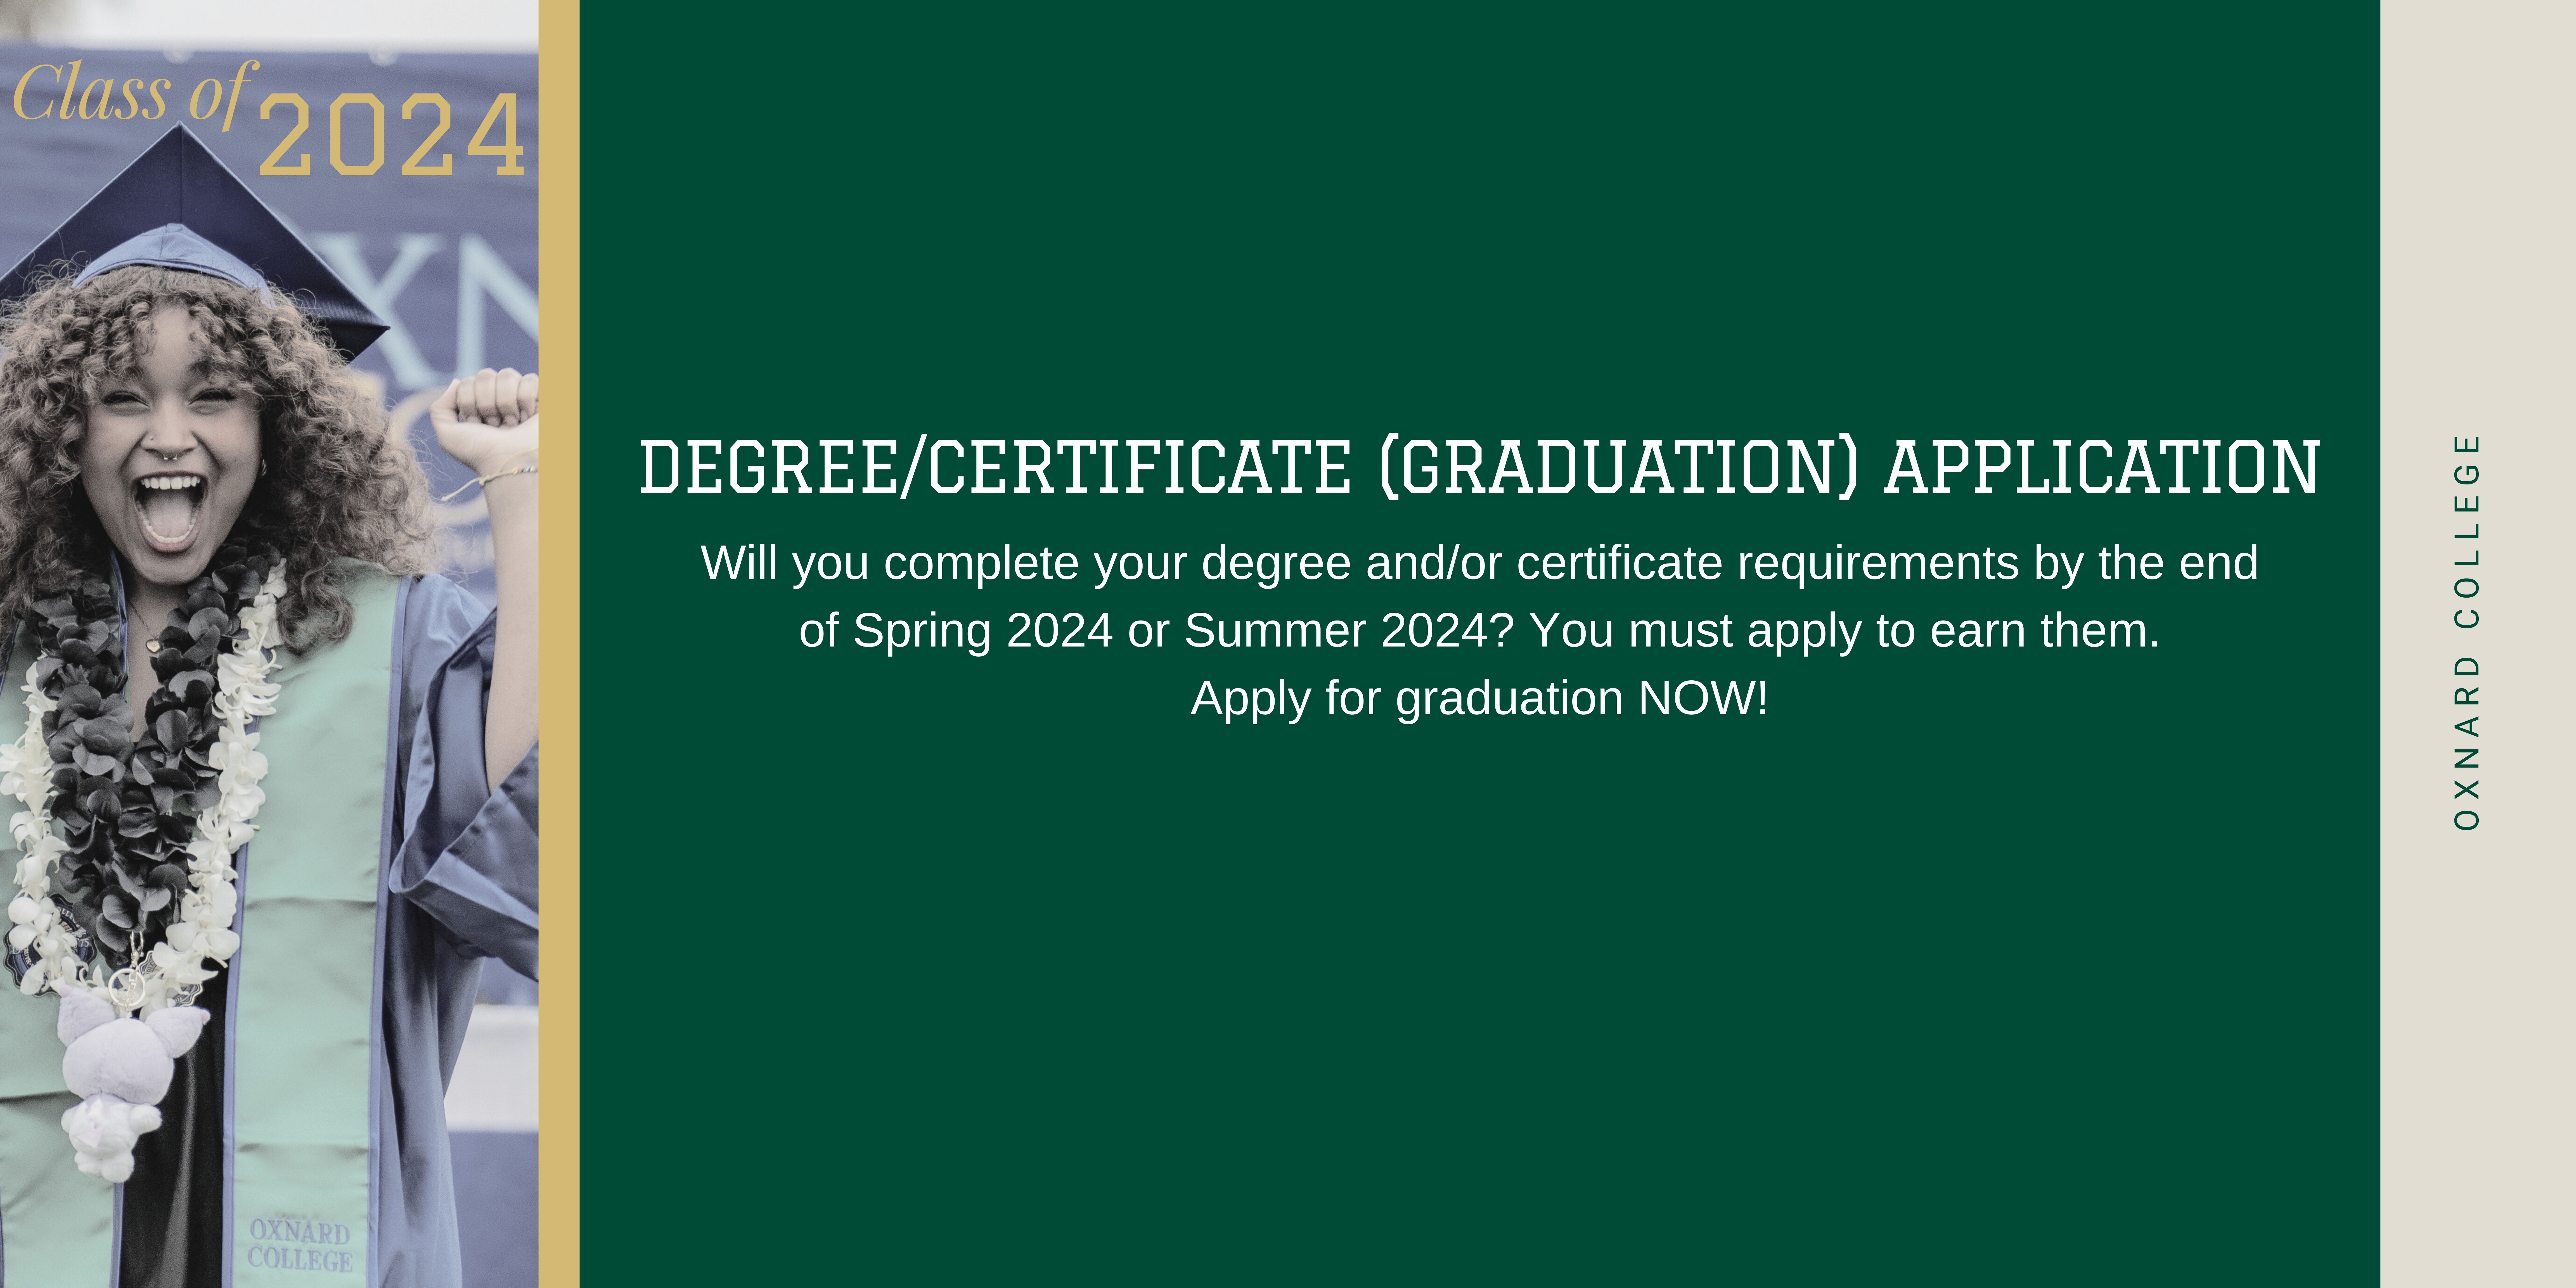 Will you complete your degree and/or certificate requirements by the end of Spring 2024 or Summer 2024? You must apply to earn them. Apply for graduation NOW!